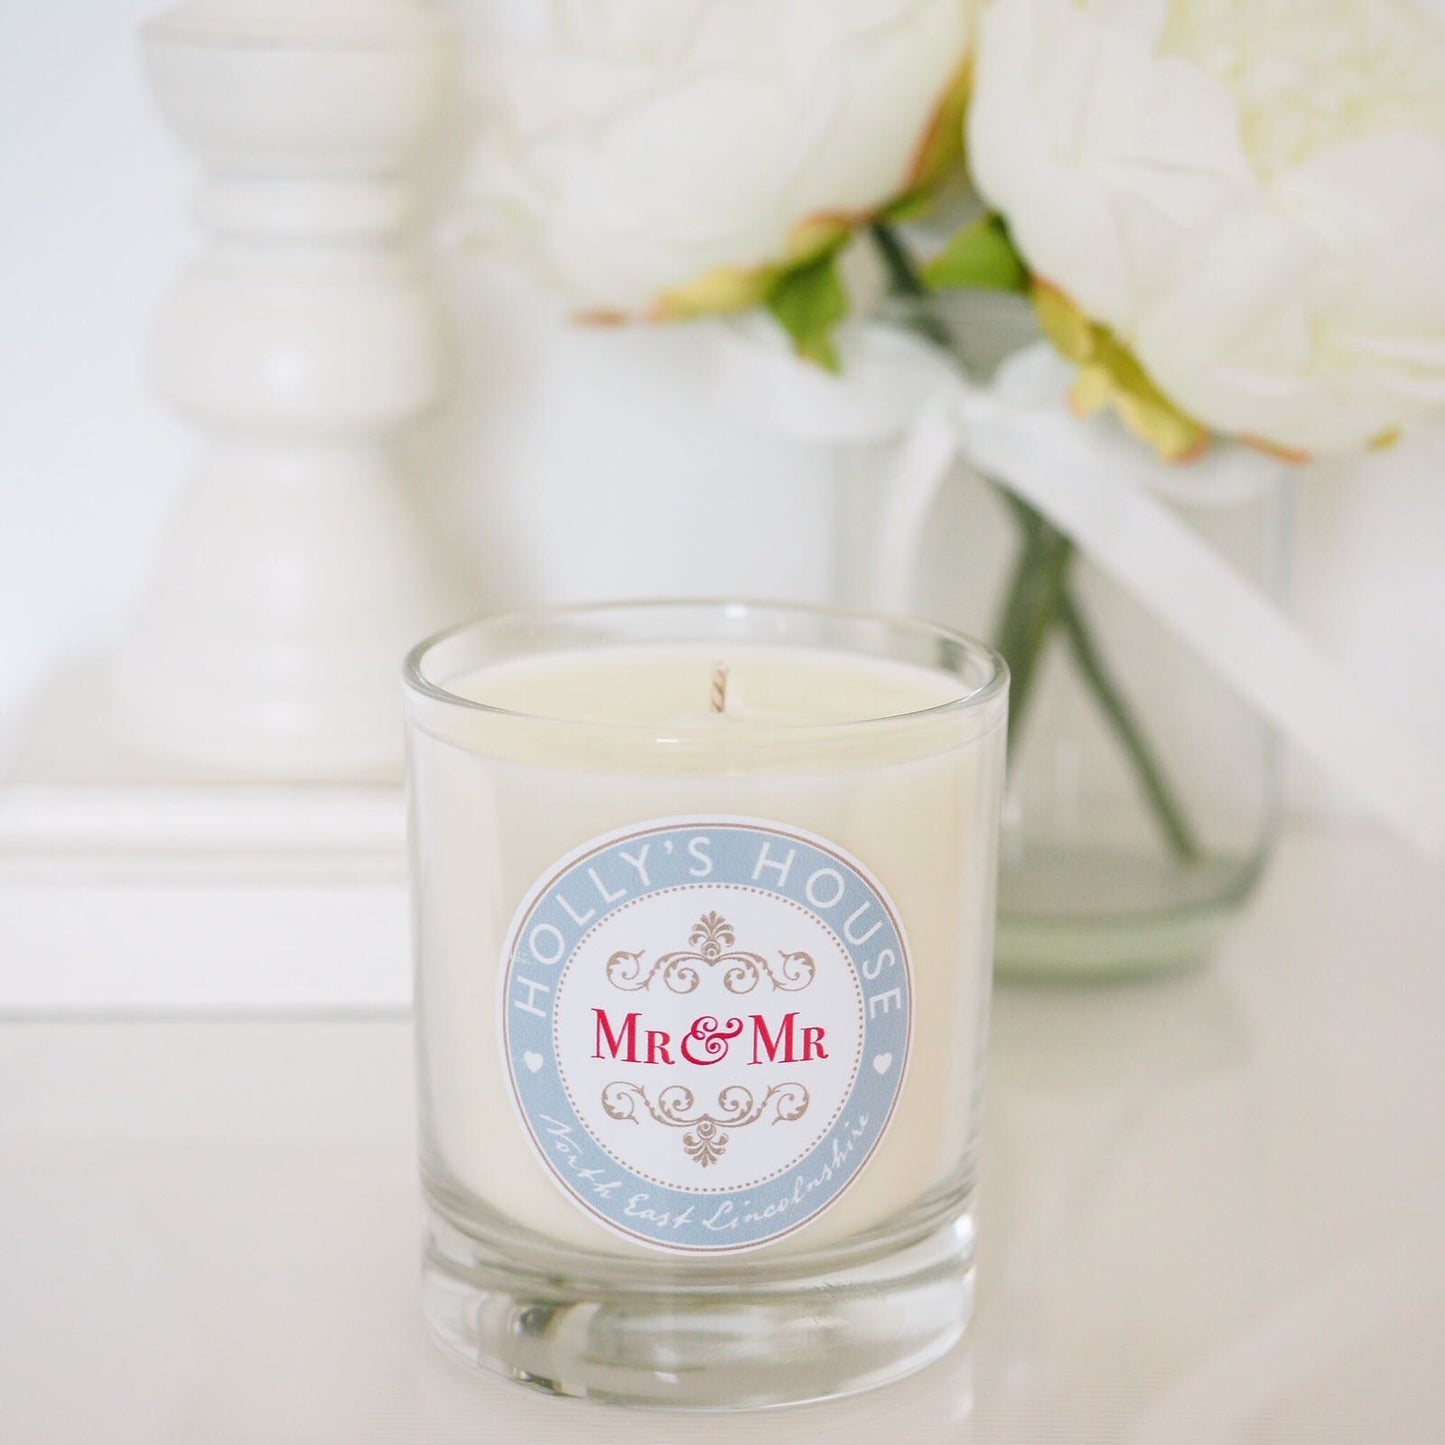 Fizz Bomb Luxury Scented Candle